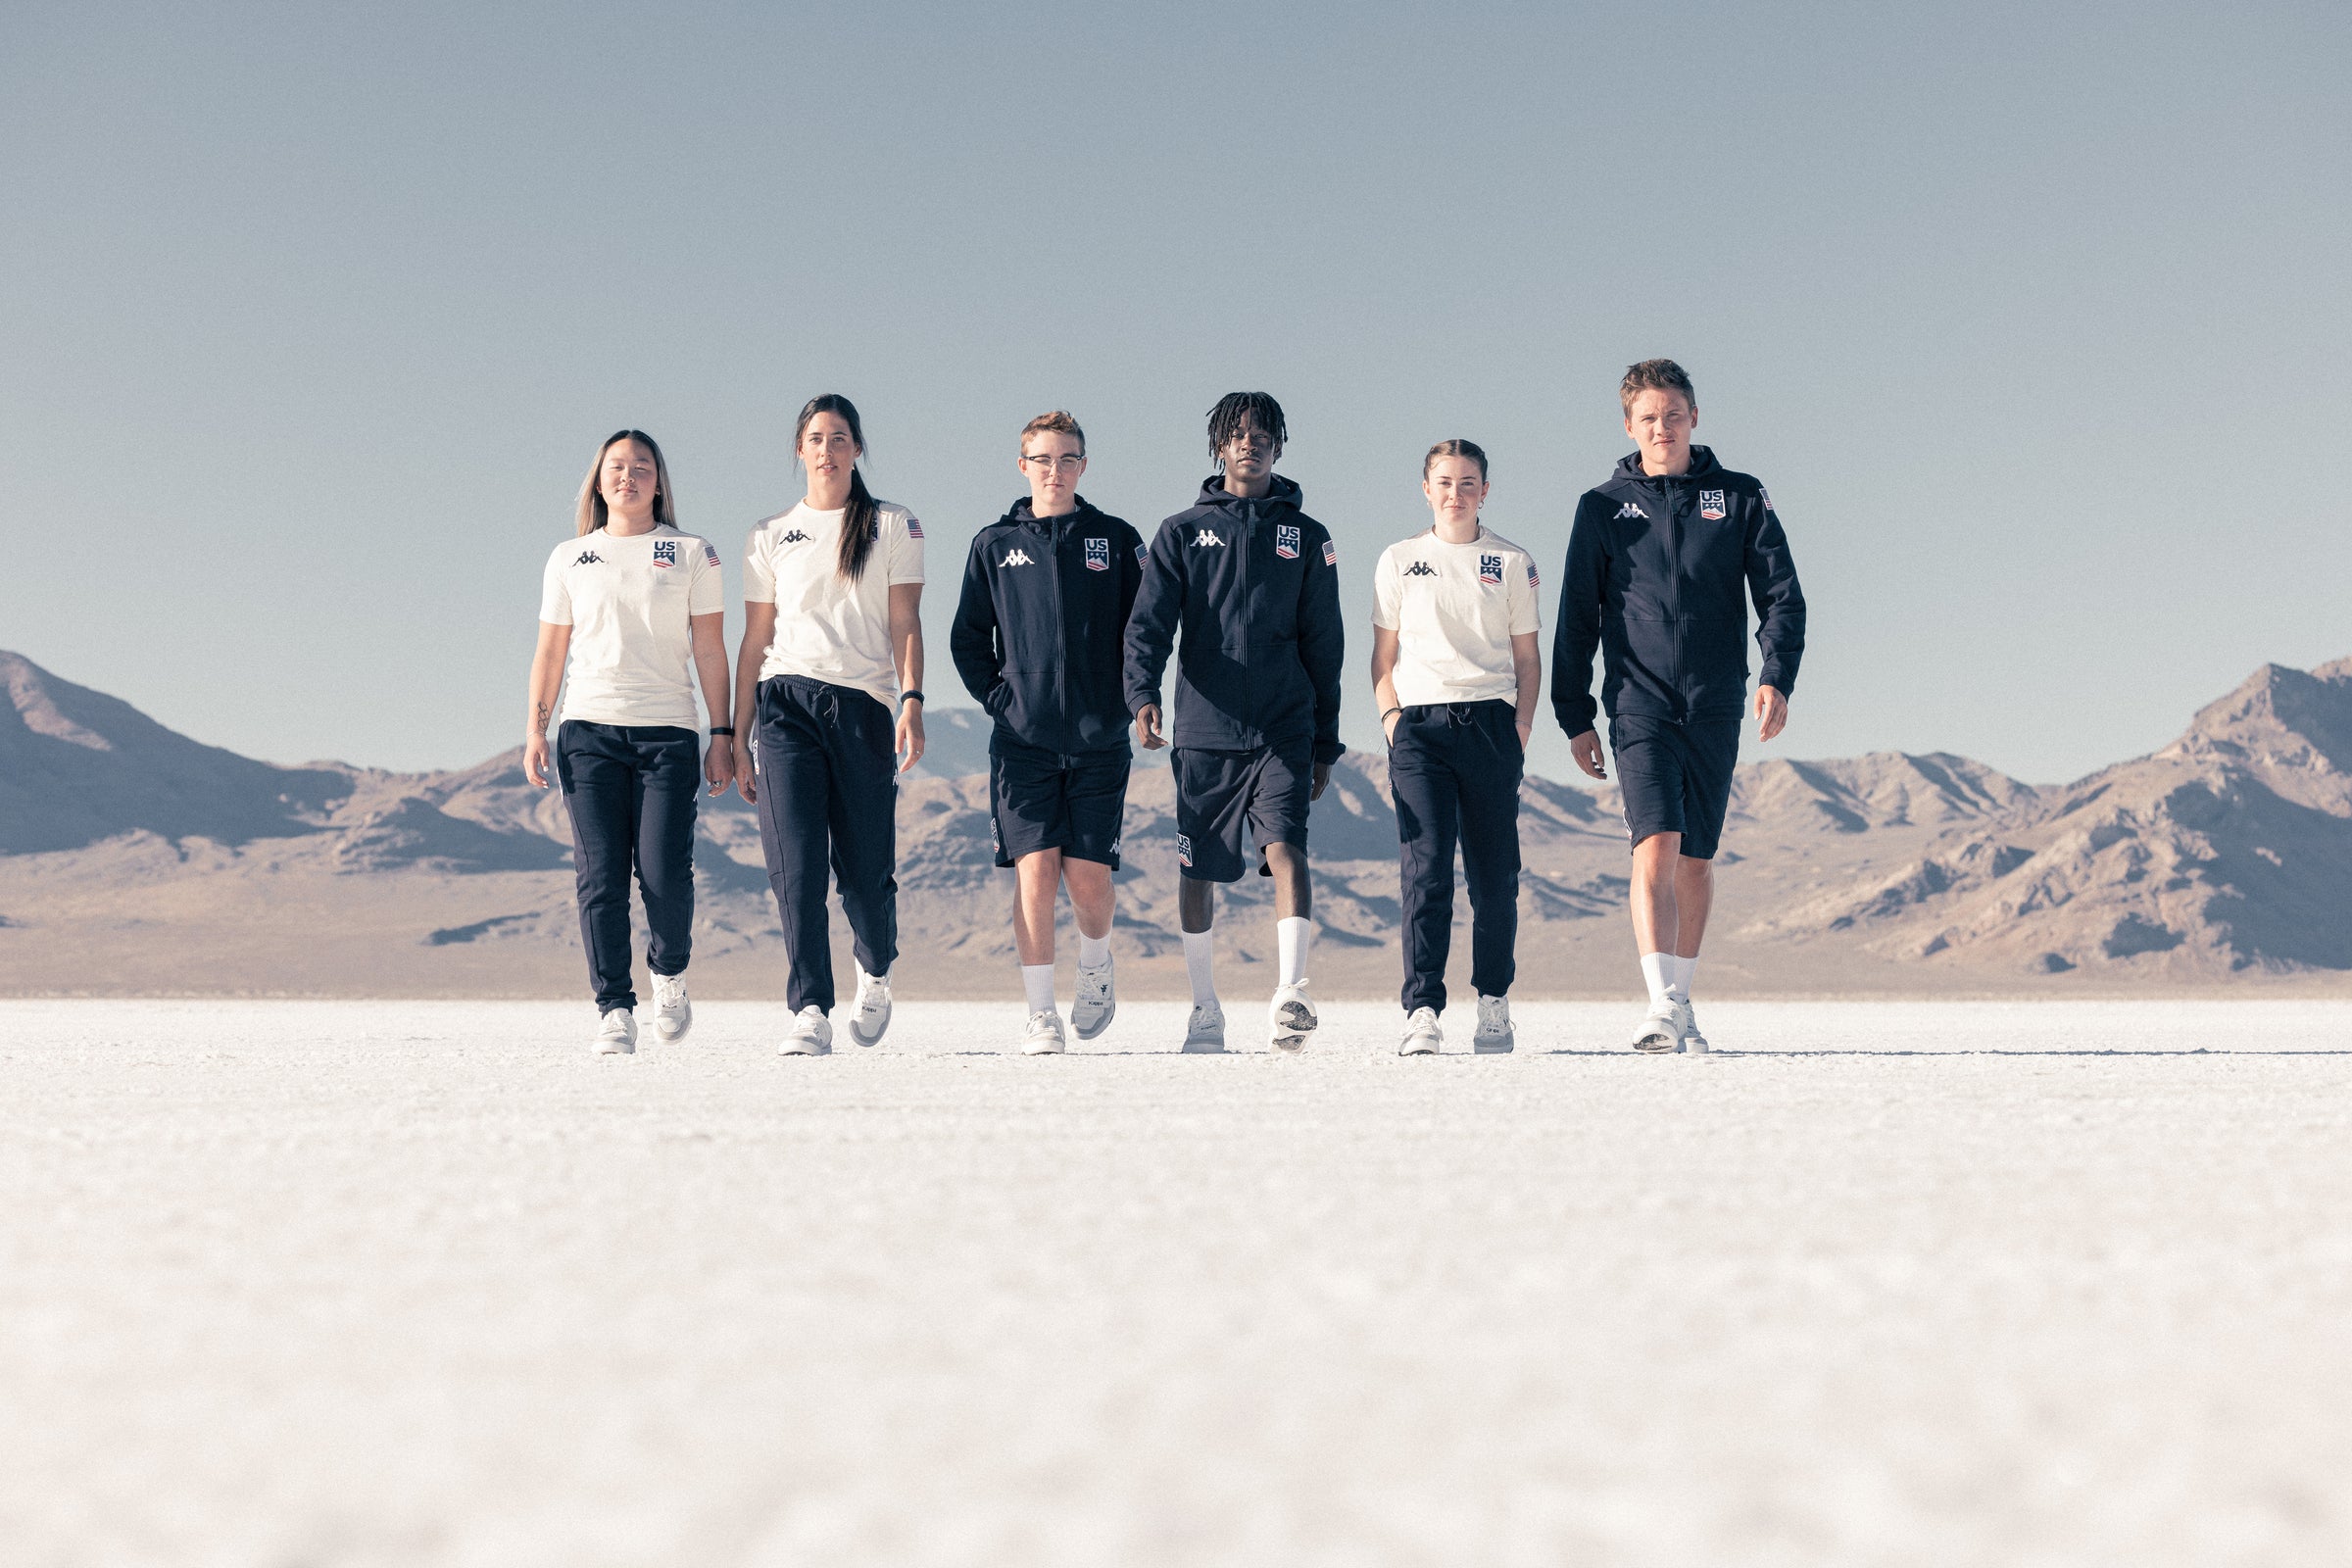 Group shot of six US athletes walking together in Kappa apparel on open salt flats.